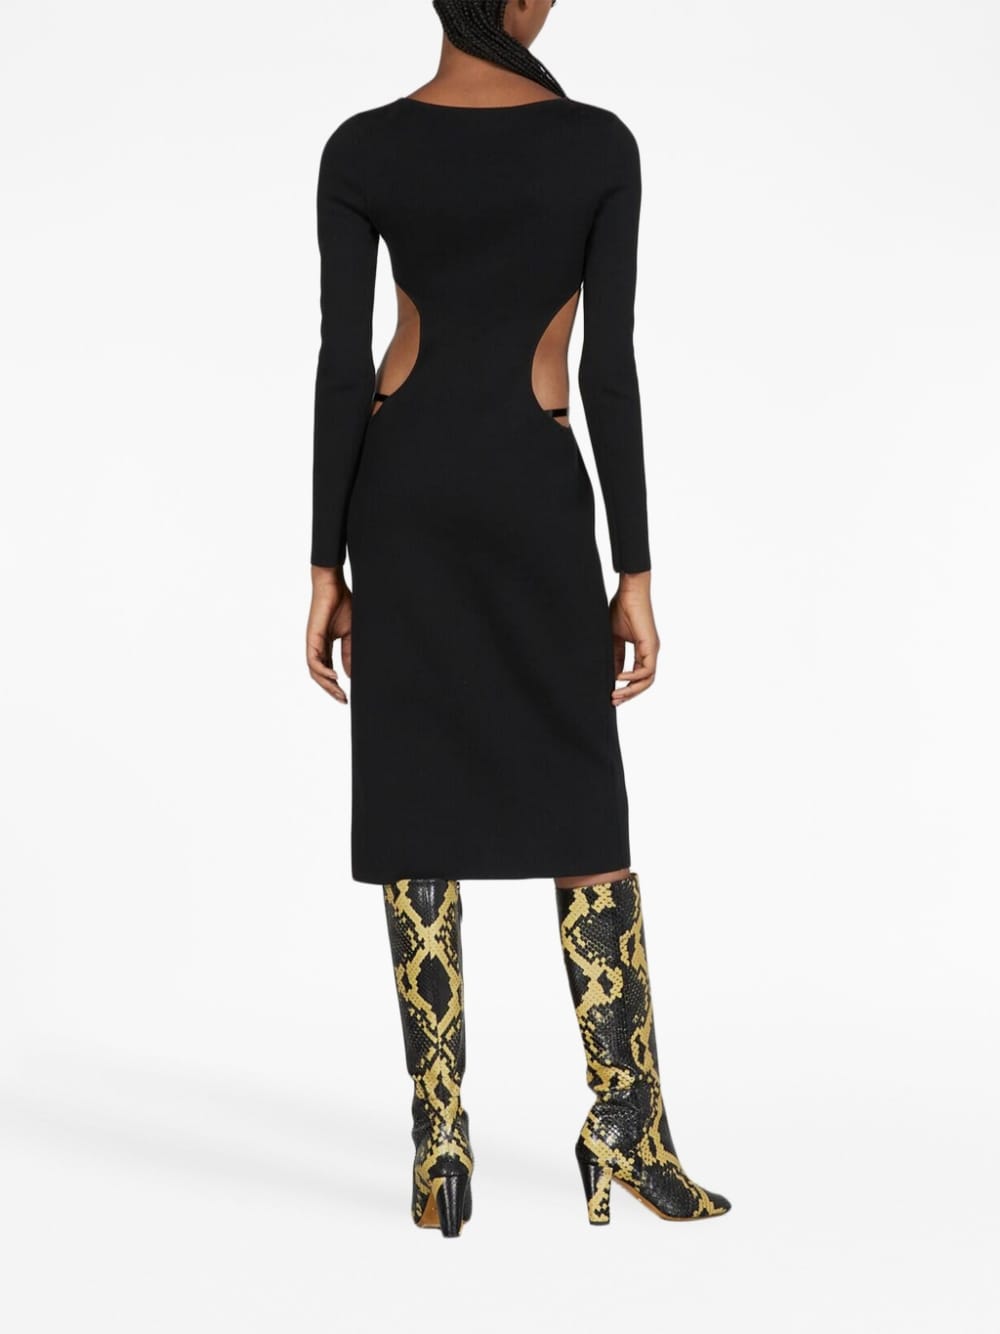 GUCCI Black Cut-Out Midi Dress for Women's SS23 Collection